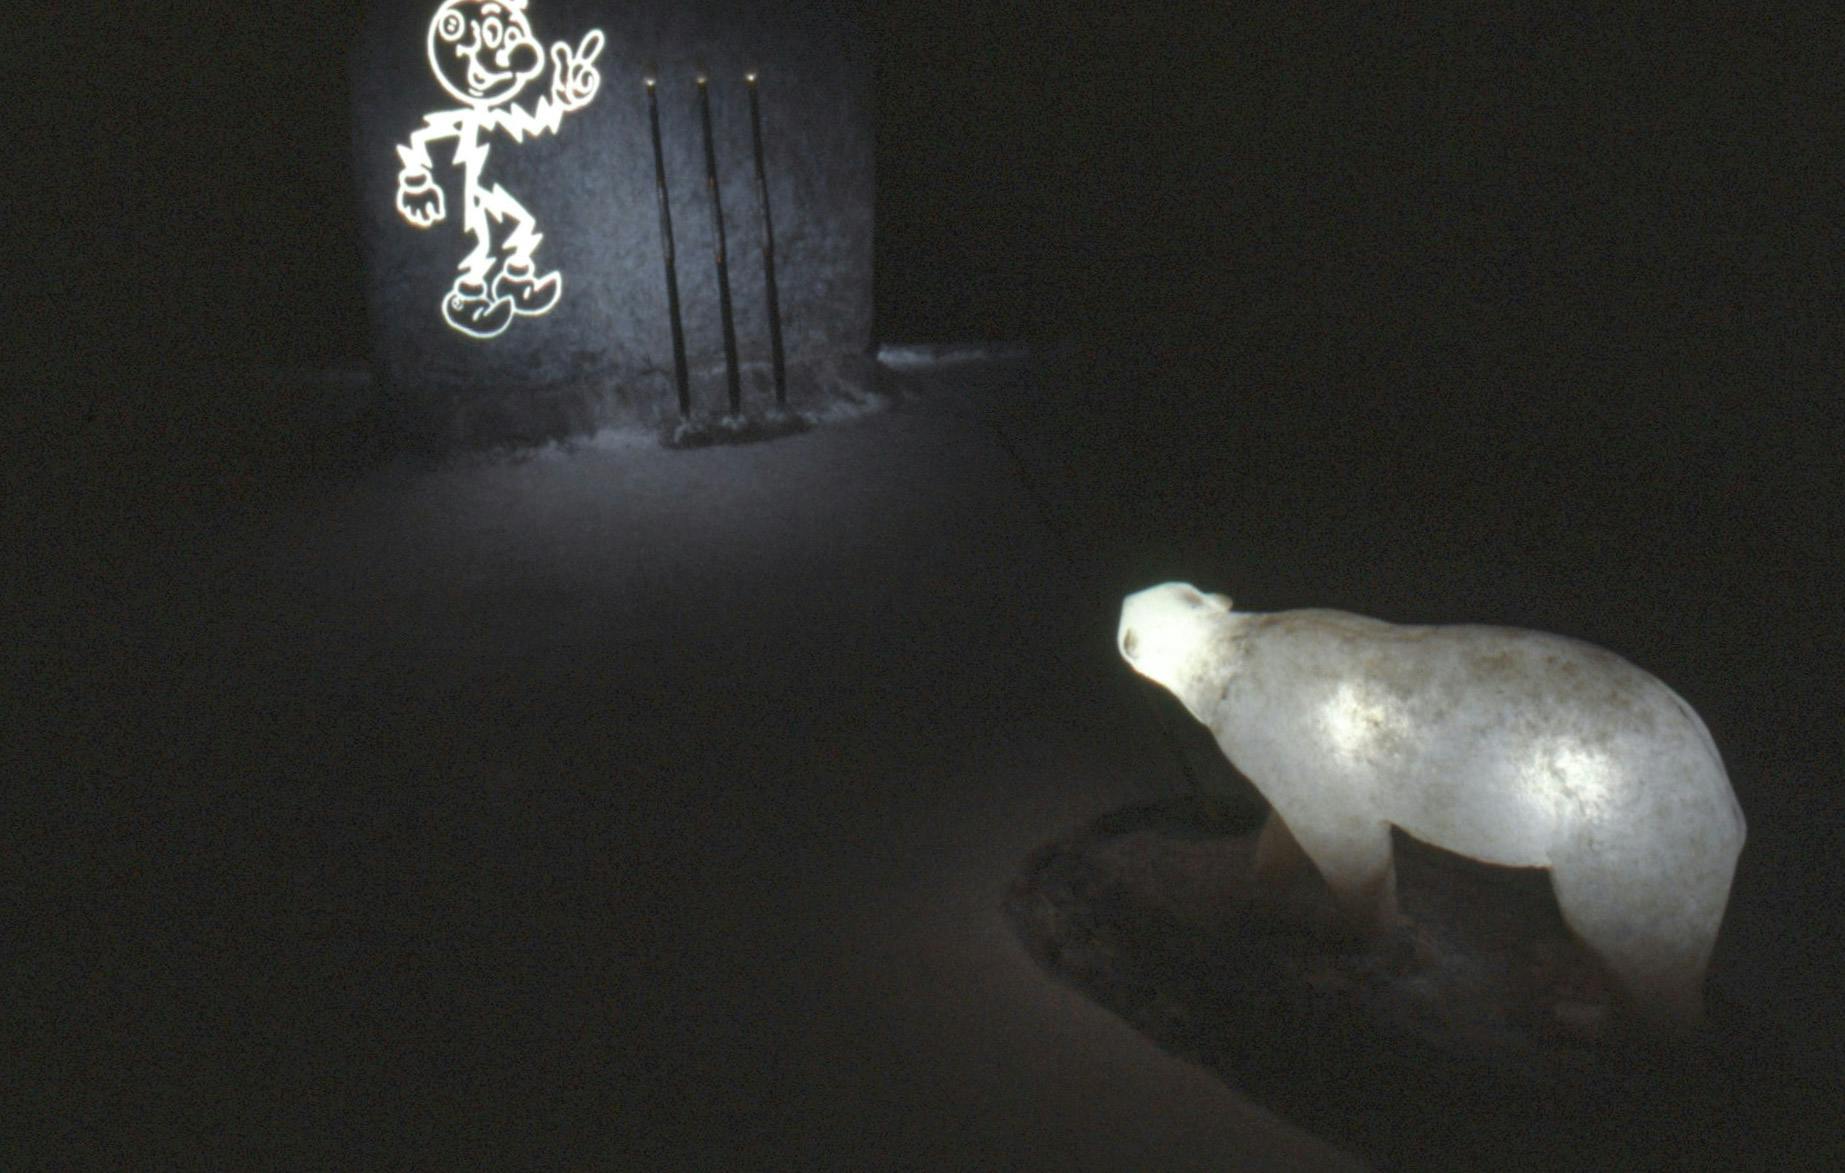 On one side of a dark room, there is a glowing polar bear sculpture, and a faux stone wall with 3 spears resting against it. The wall shows a lit up character with a lightning bolt body on the other.